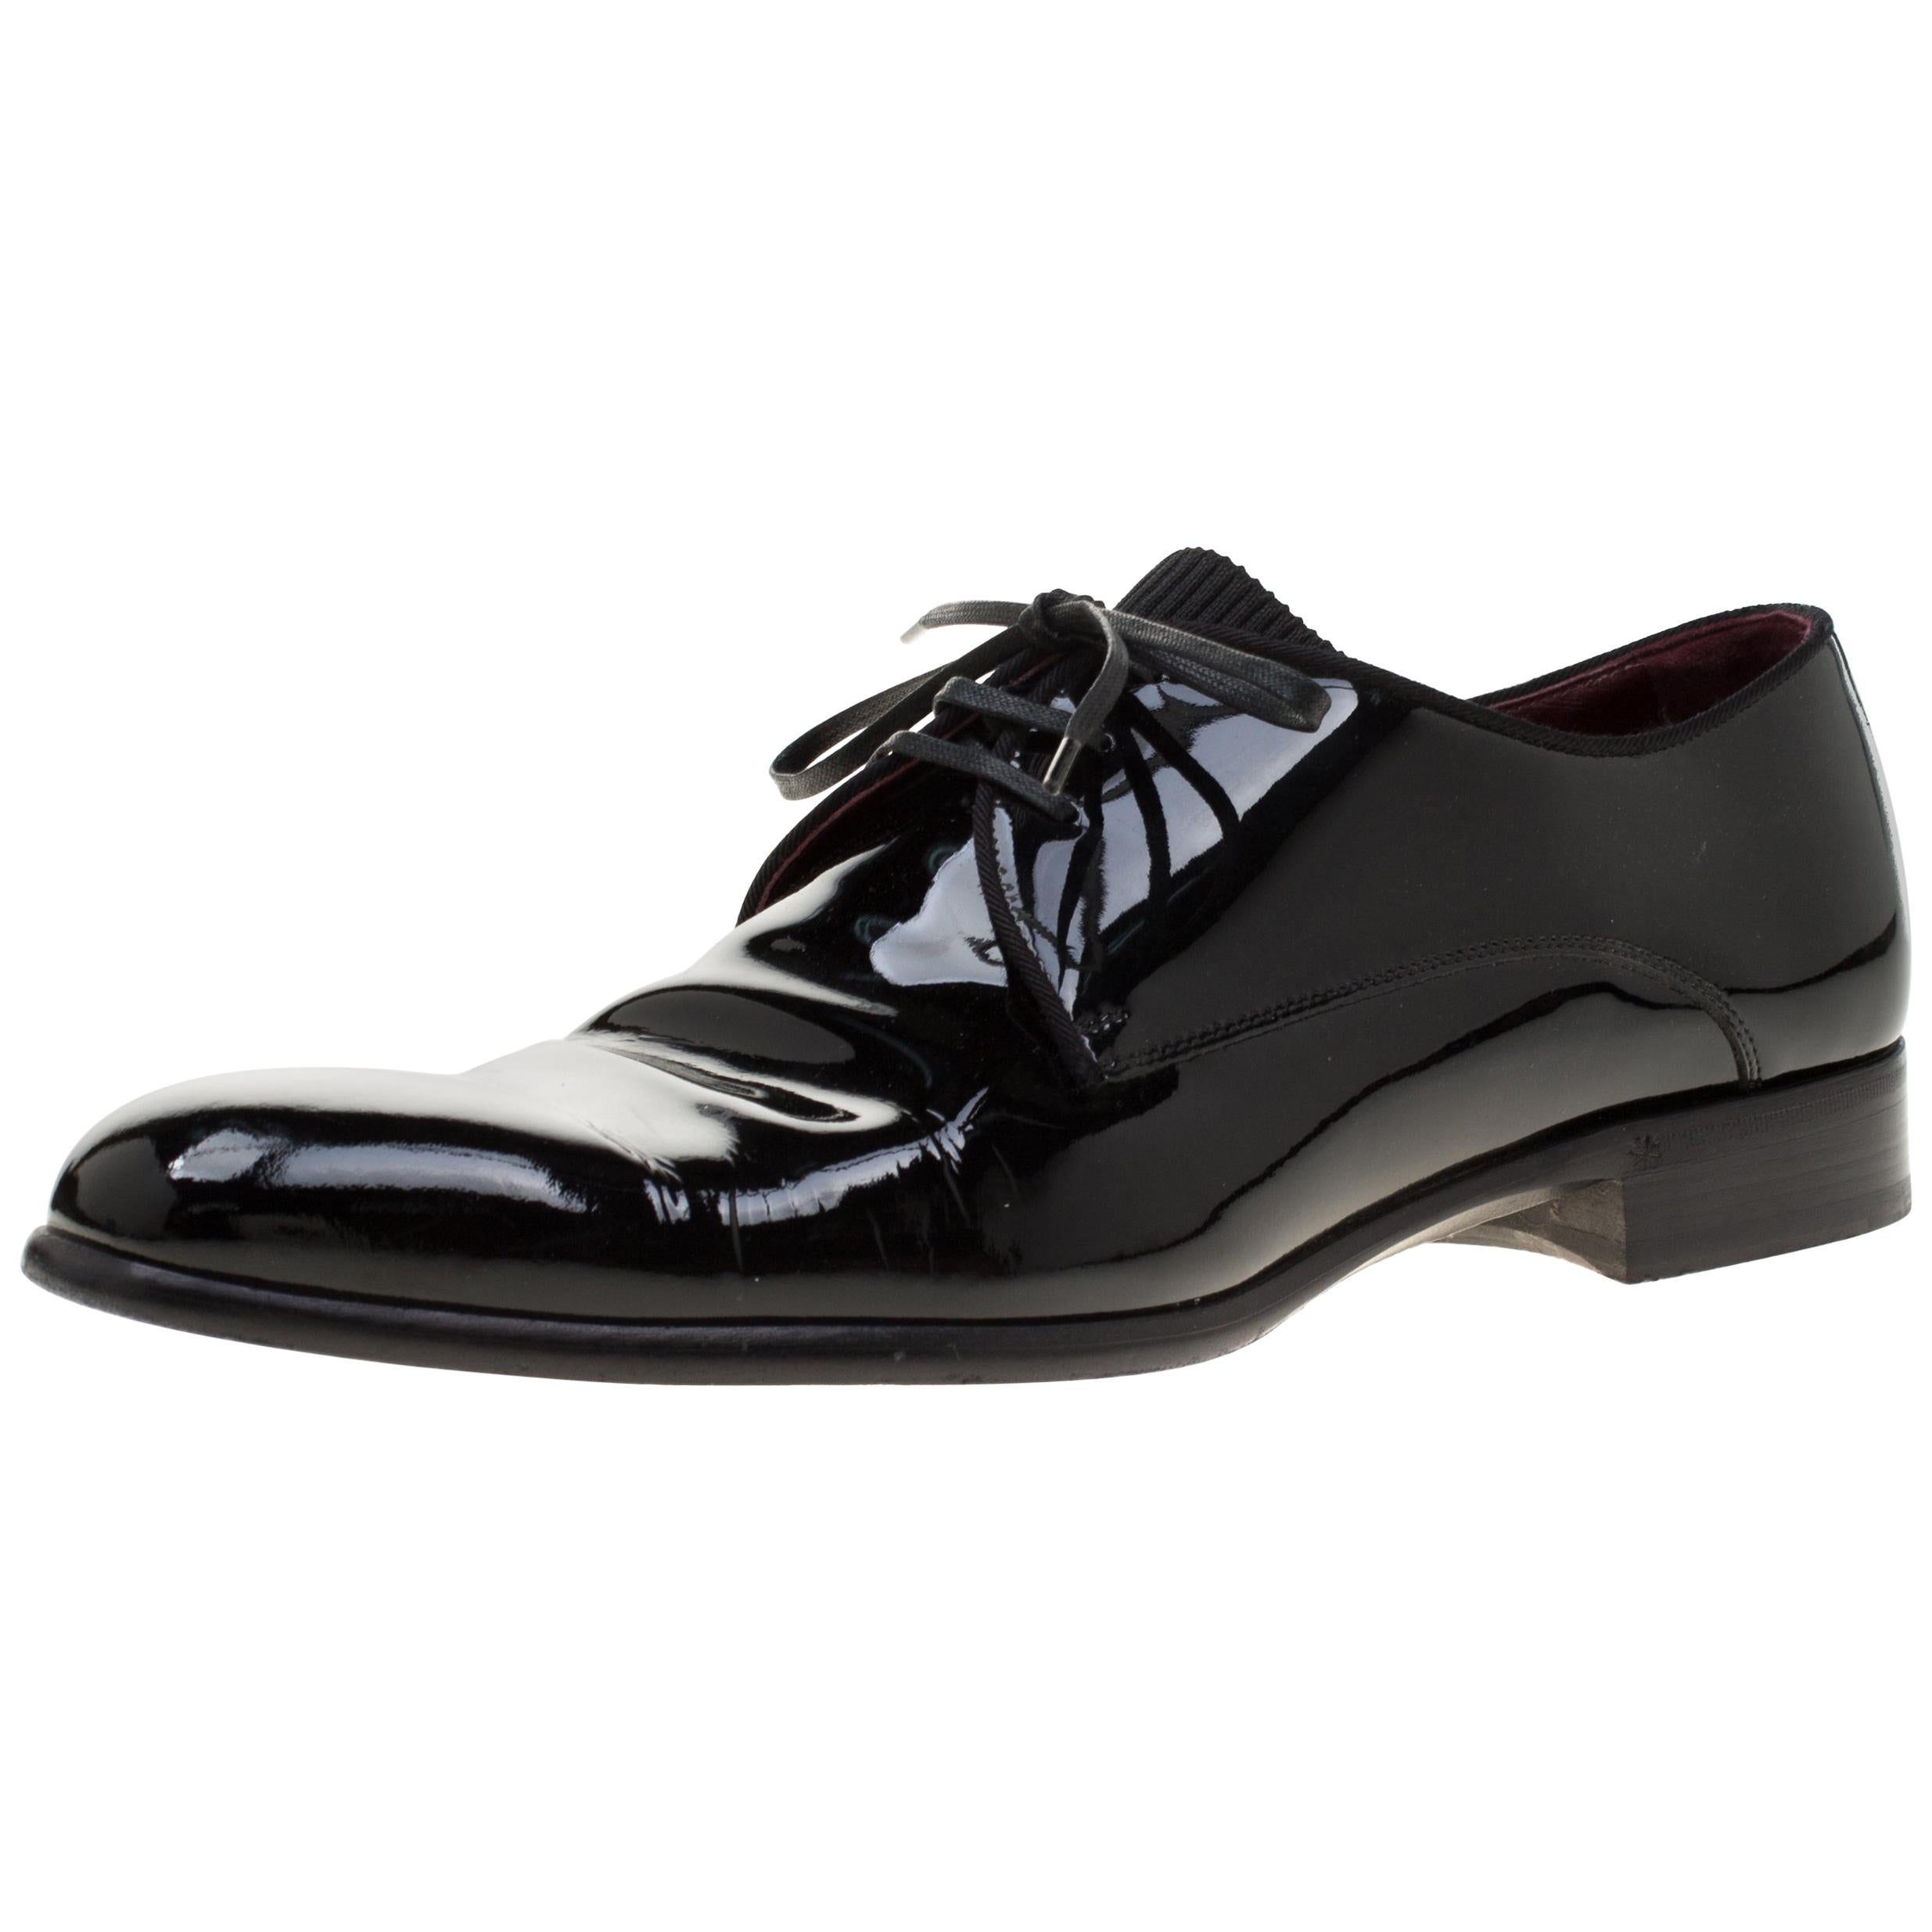 Dolce and Gabbana Black Patent Leather Derby Oxford Shoes Size 43